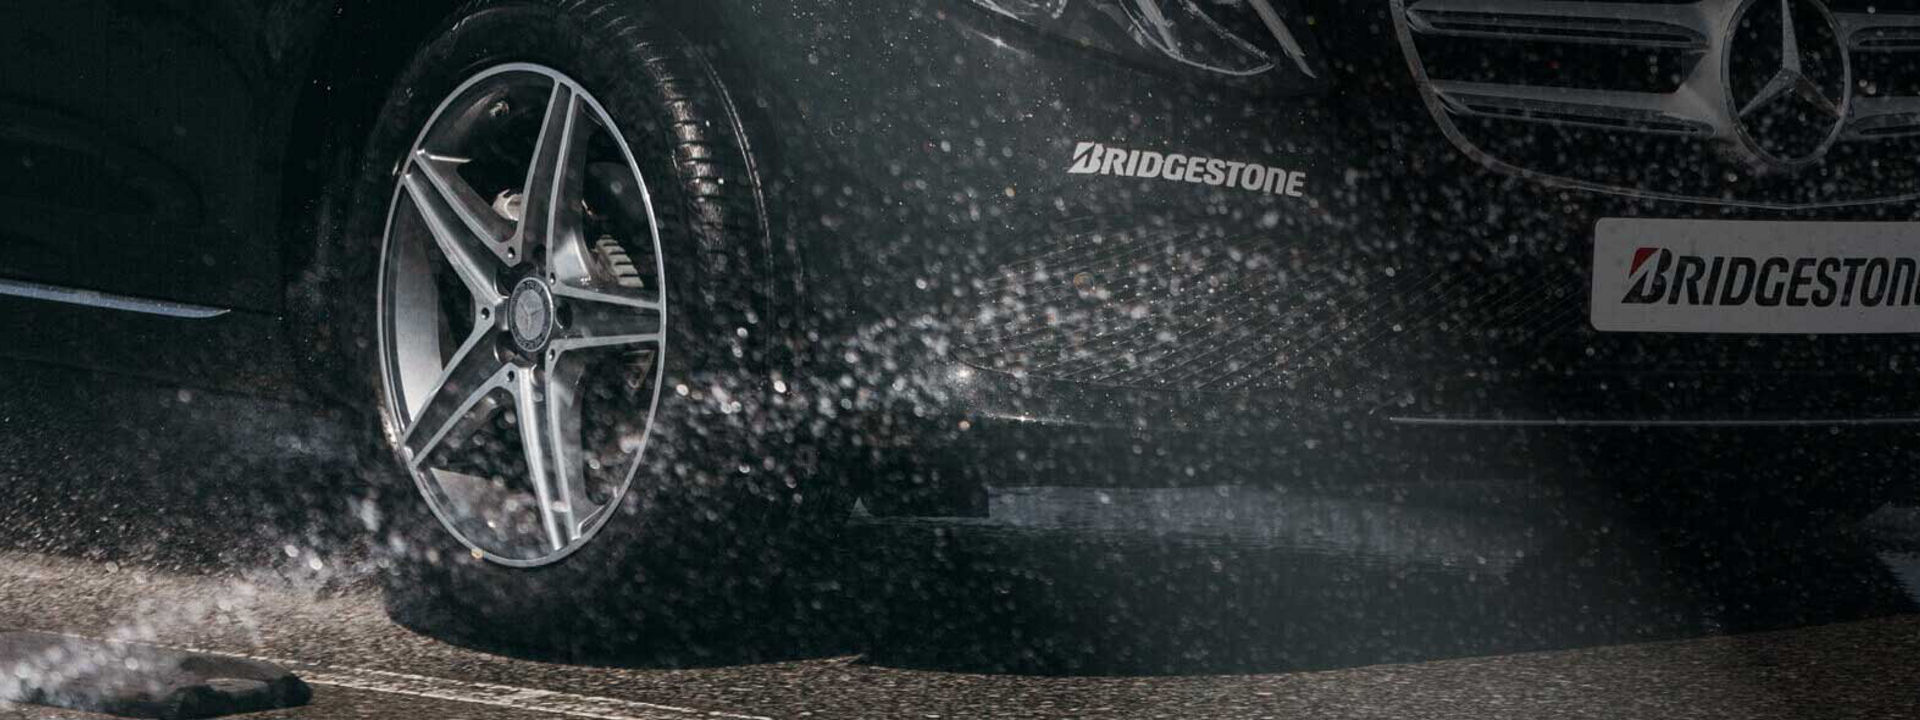 Car on a highway, equipped with Bridgestone tyres with ENLITEN technology